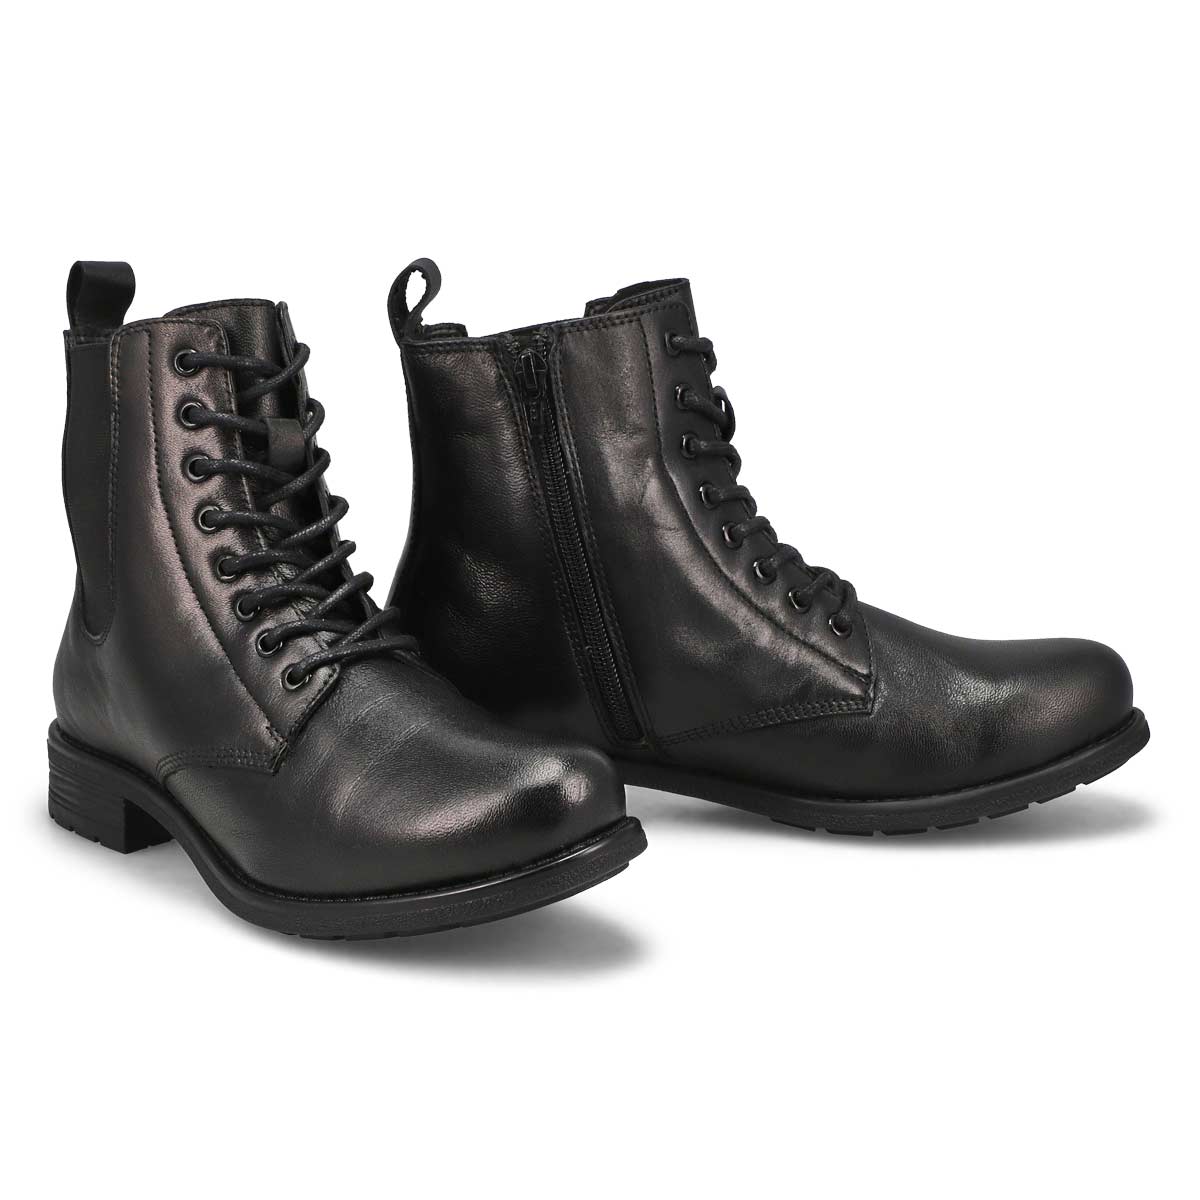 Women's Diana Leather Lace Up Zip Boot - Black